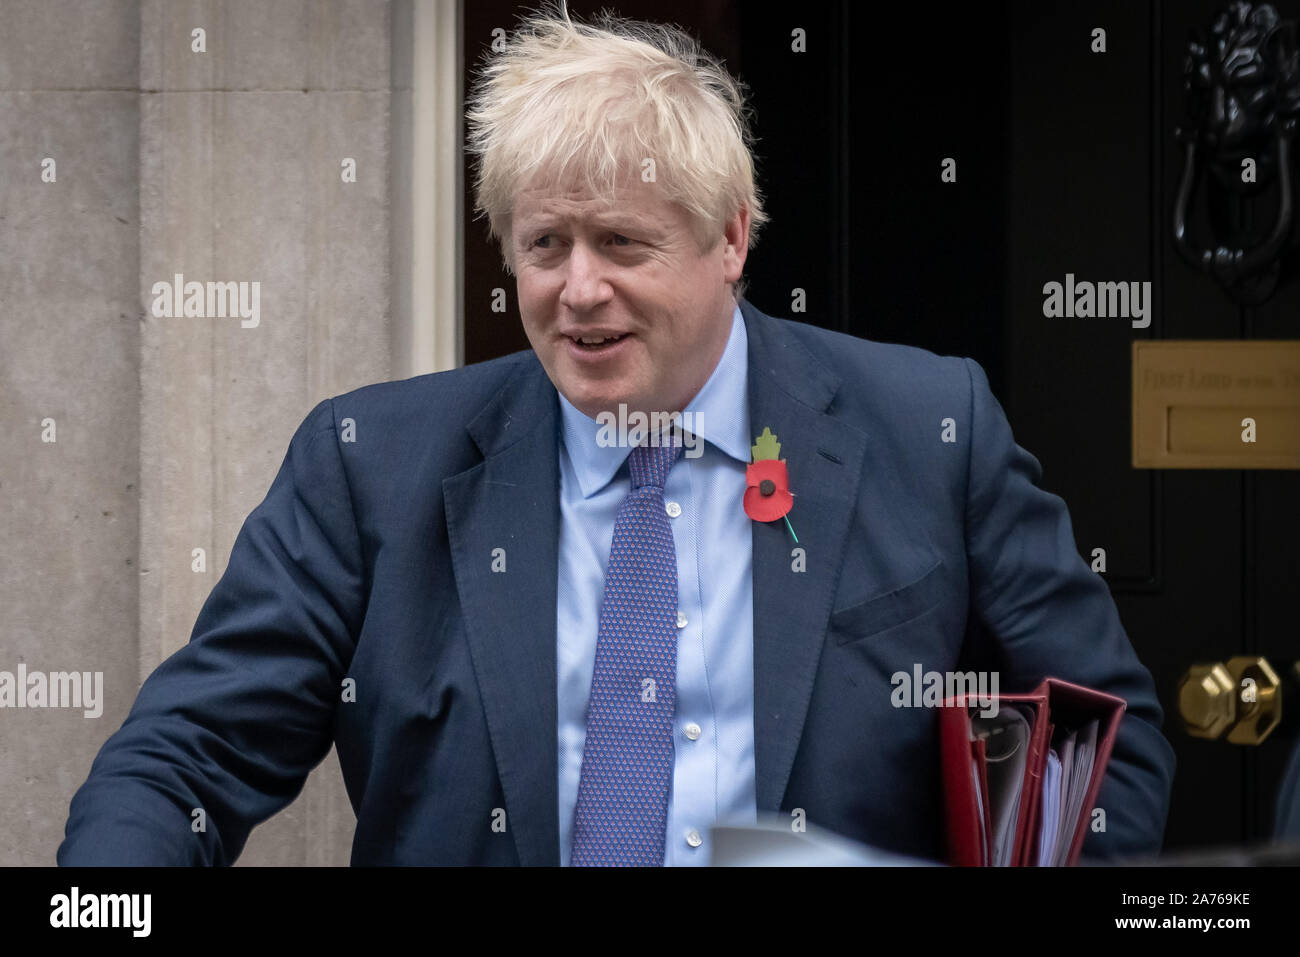 London, UK. 30th Oct 2019. Prime Minister Boris Johnson leaves No.10 Downing Street for weekly questions in Parliament. Credit: Guy Corbishley/Alamy Live News Stock Photo